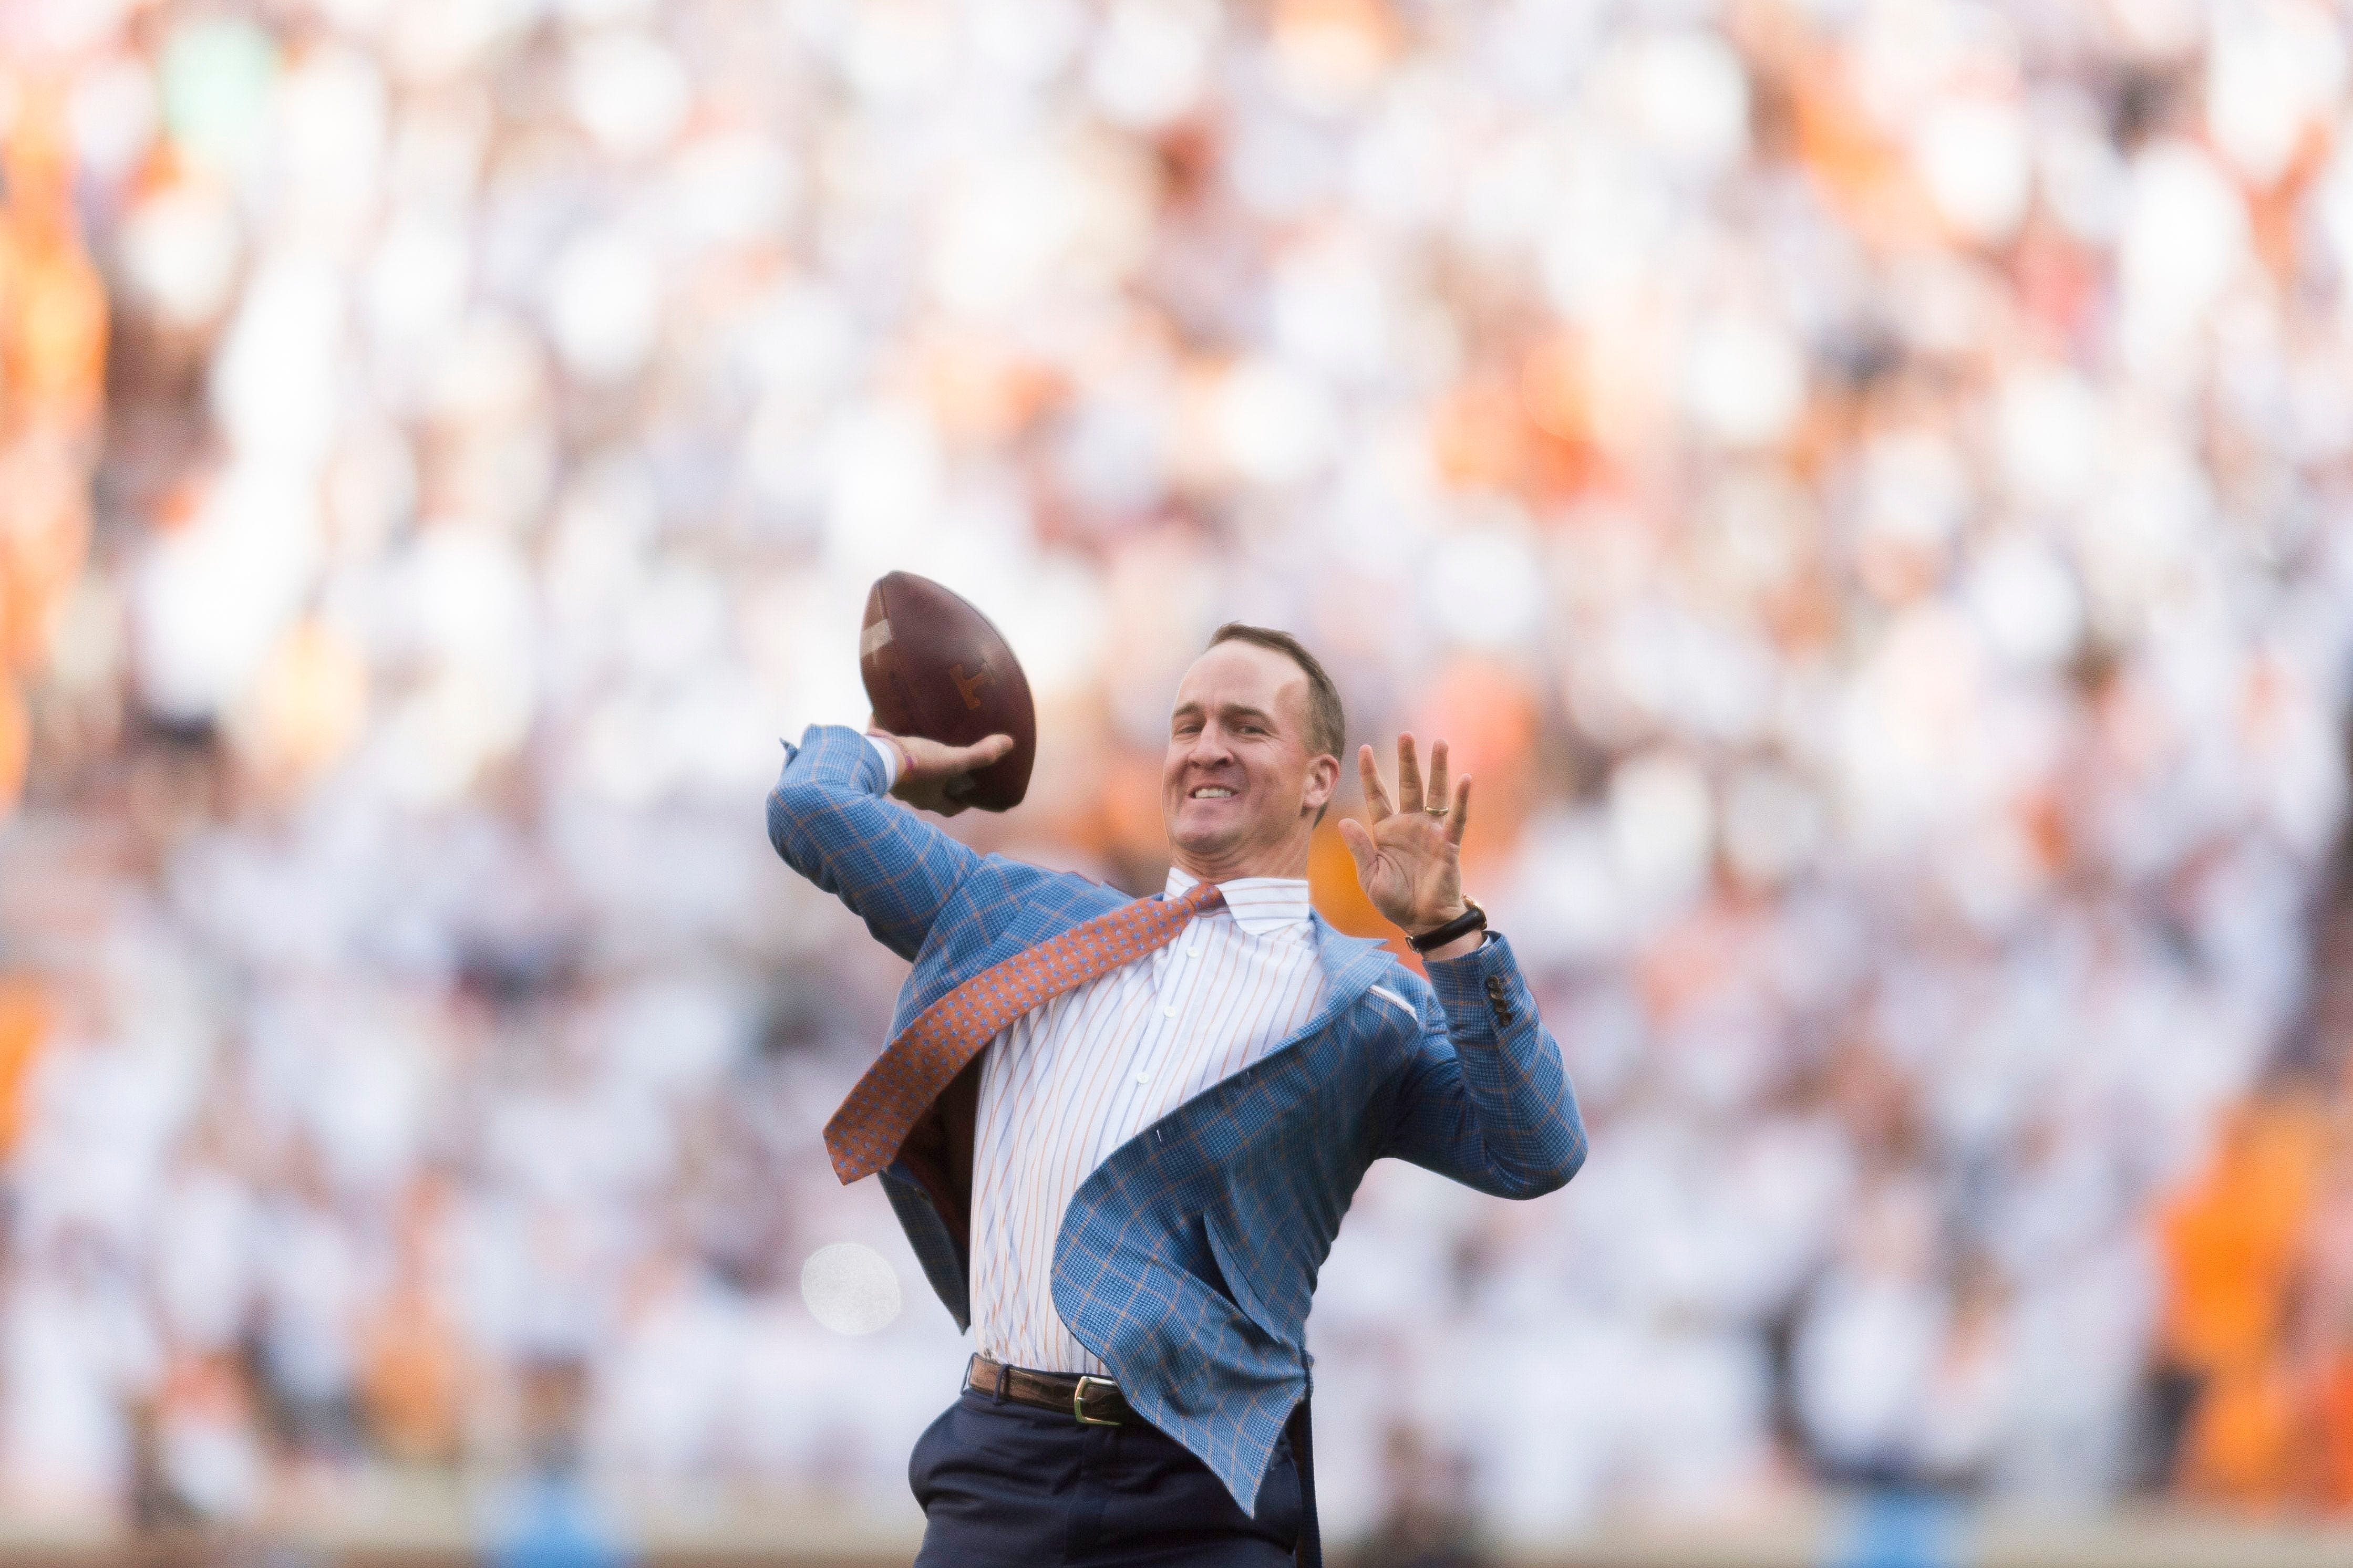 Why is Peyton Manning at the 2024 Paris Olympics? Tennessee QB part of NBC's opening ceremony coverage